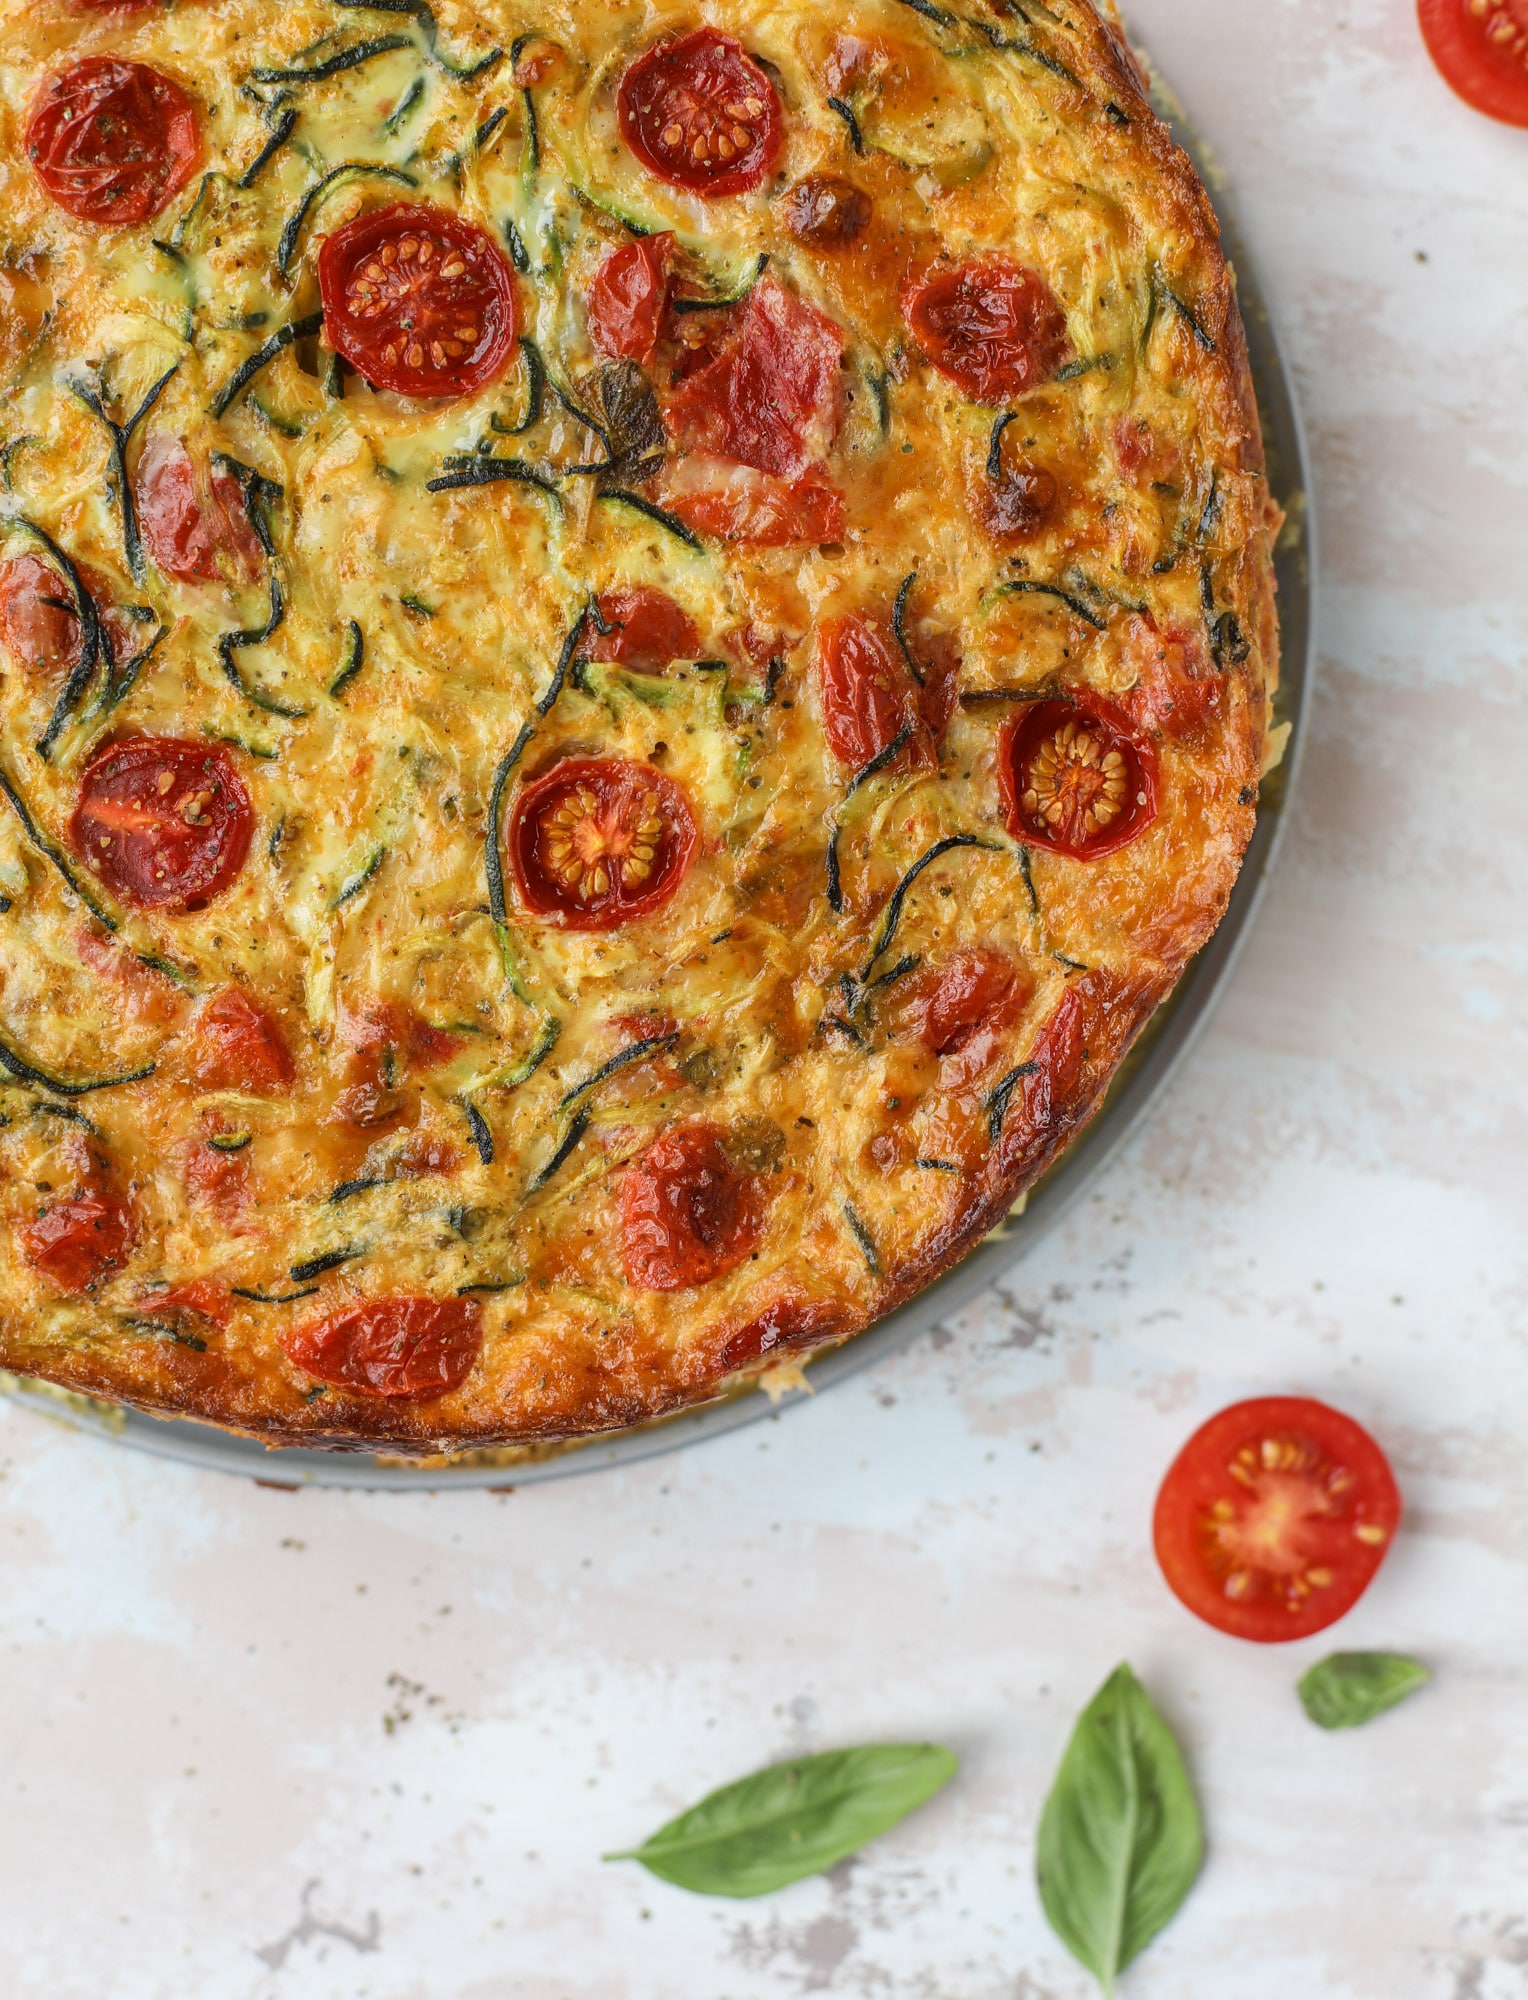 This zucchini pie recipes is absolutely divine and perfect for breakfast or dinner! Completely with garlic and blistered tomatoes, it combines cheese and egg to make a to-die-for frittata-like dish that can be eaten hot or cold! I howsweeteats.com #zucchini #pie #tomatoes #eggs #recipes #garden #summer